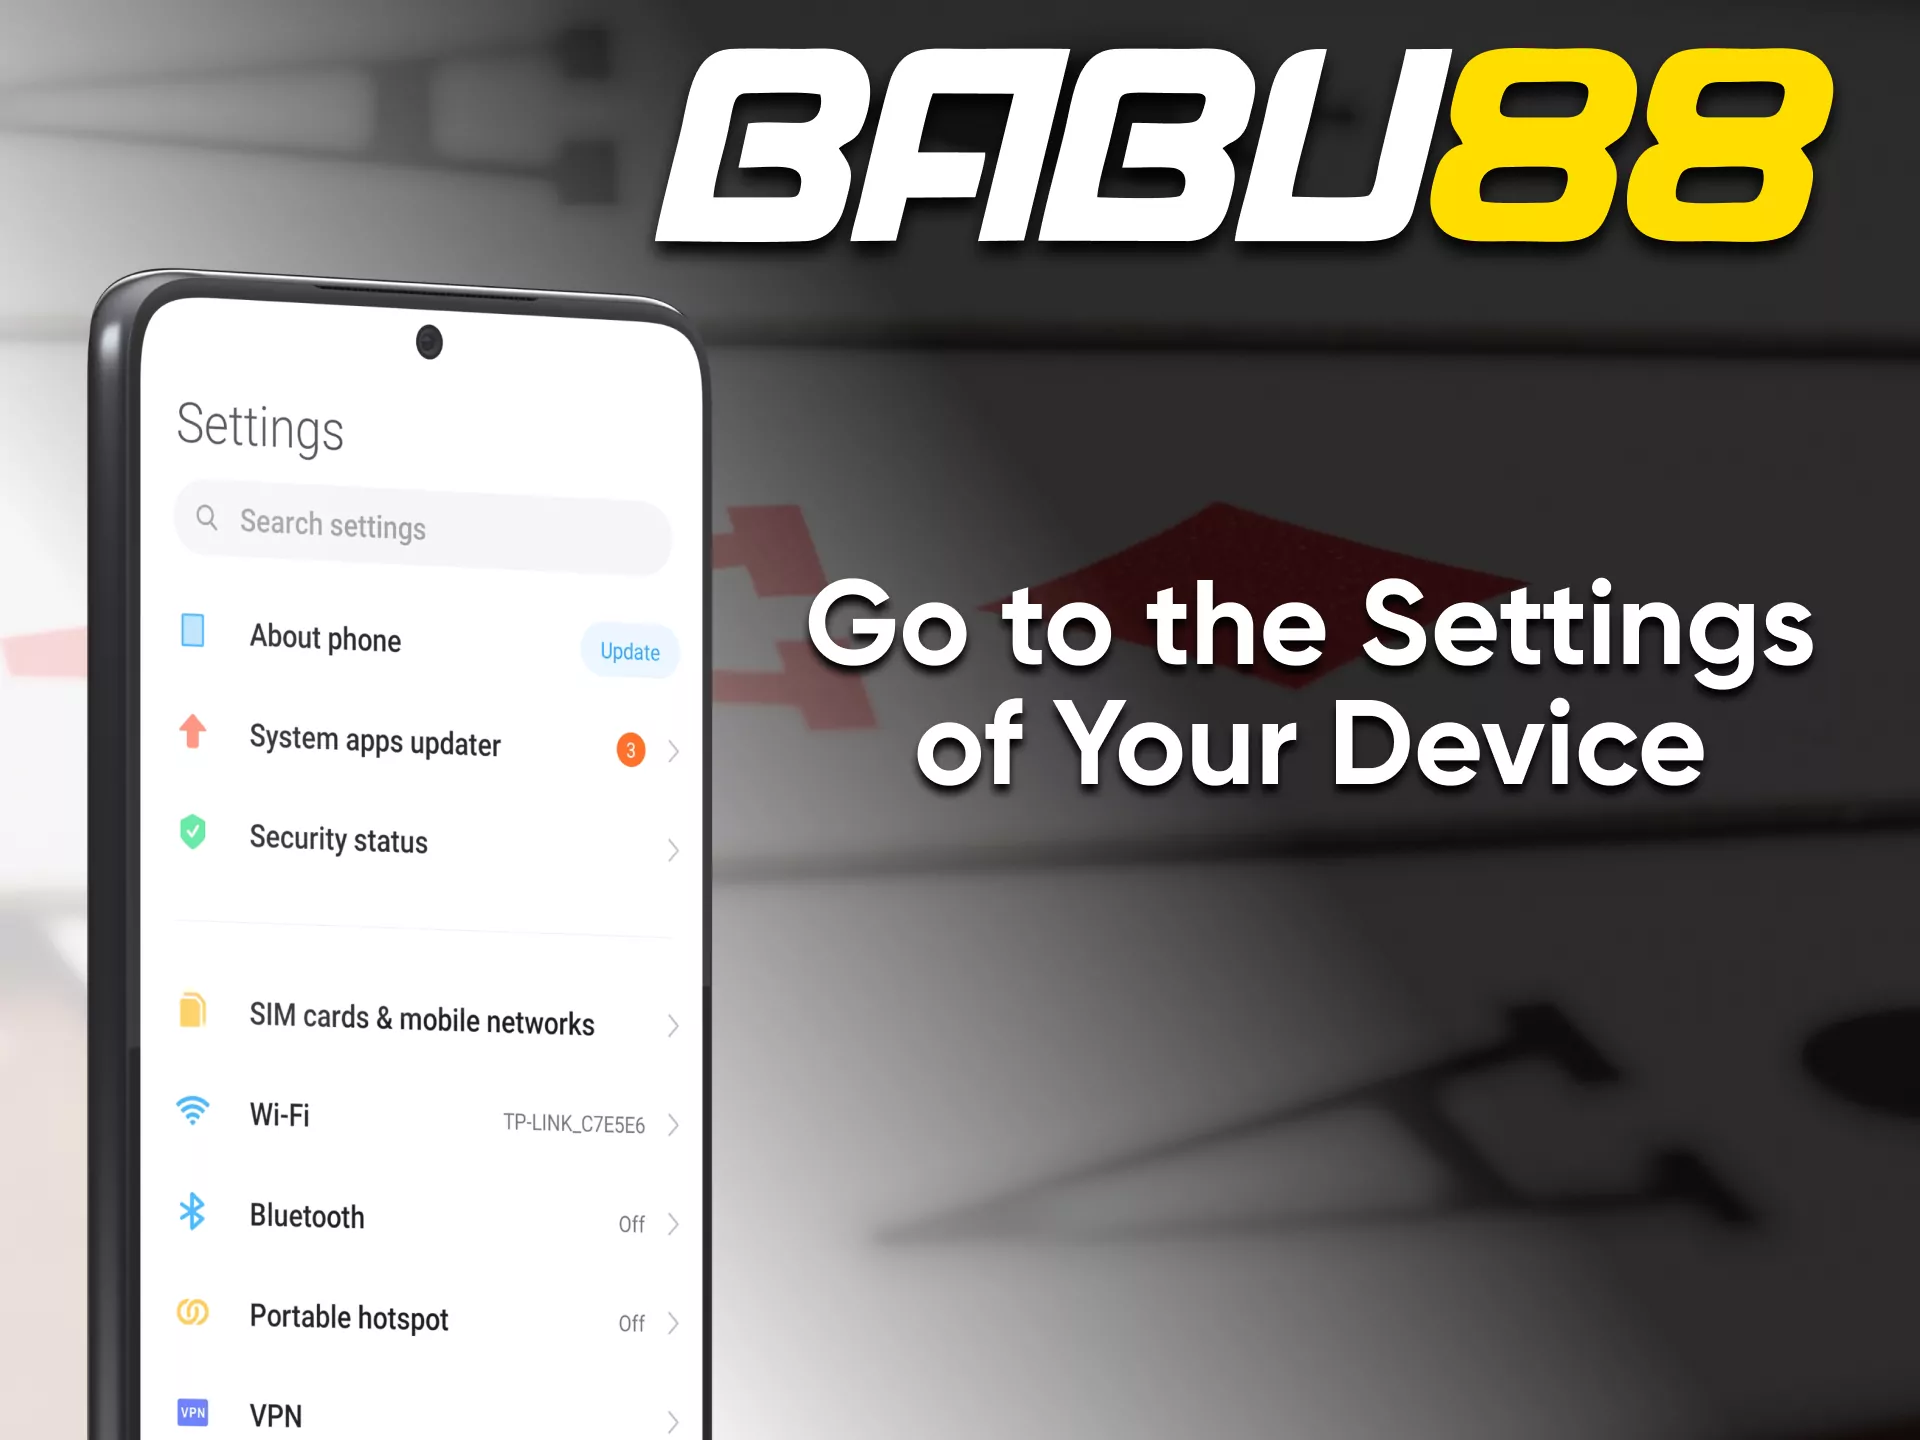 Use your phone settings to install the Babu88 app.